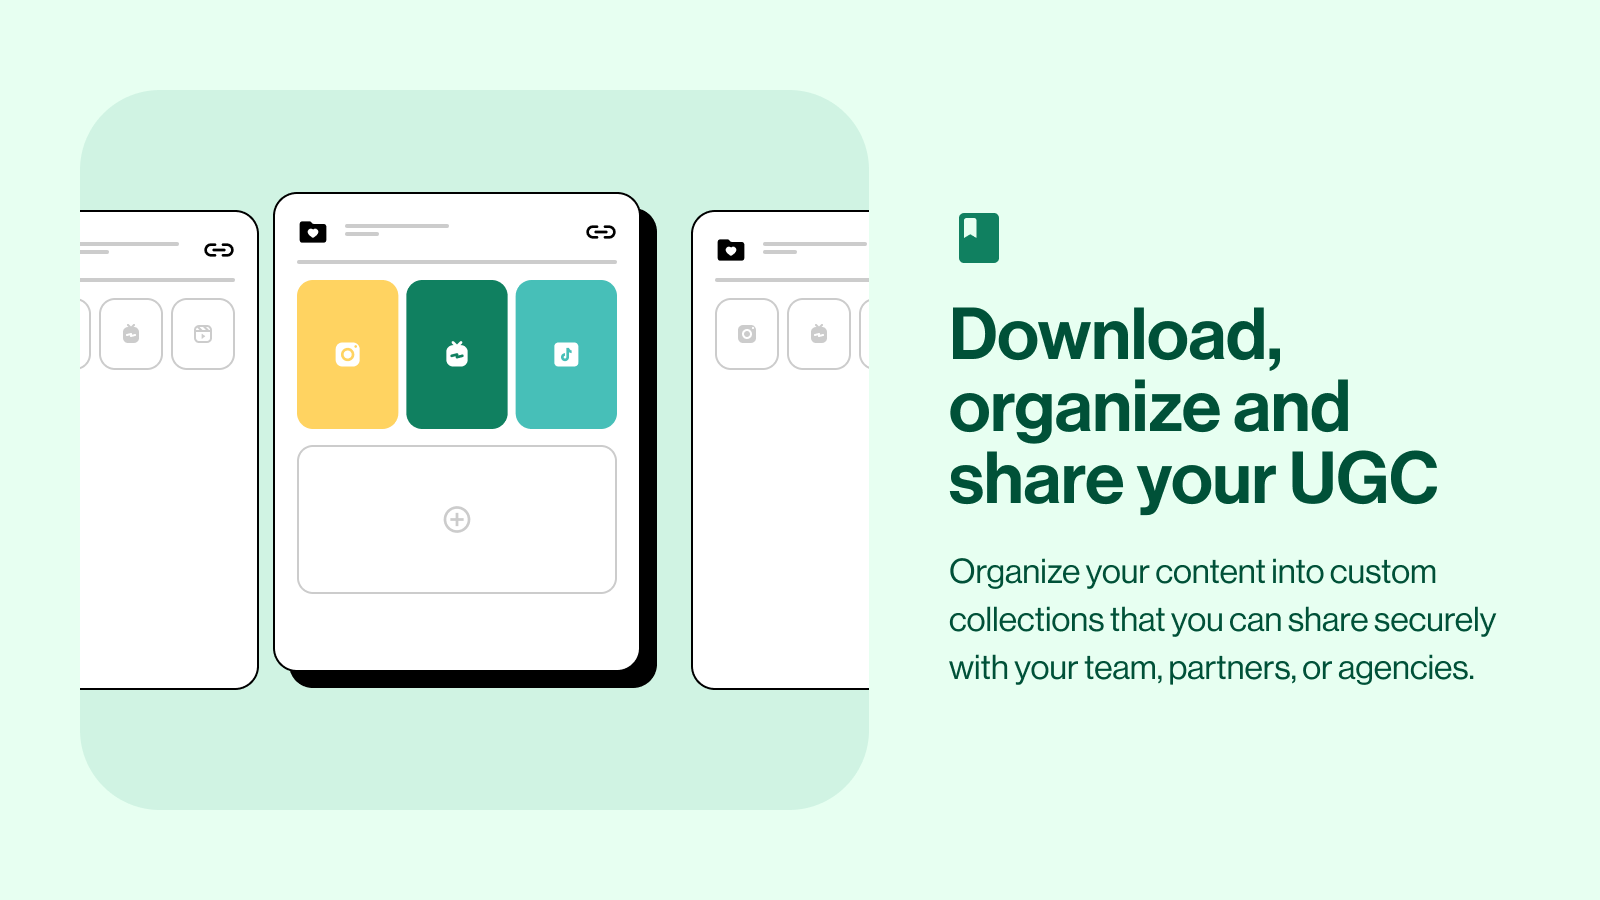 Download, organize and share your UGC to partners.